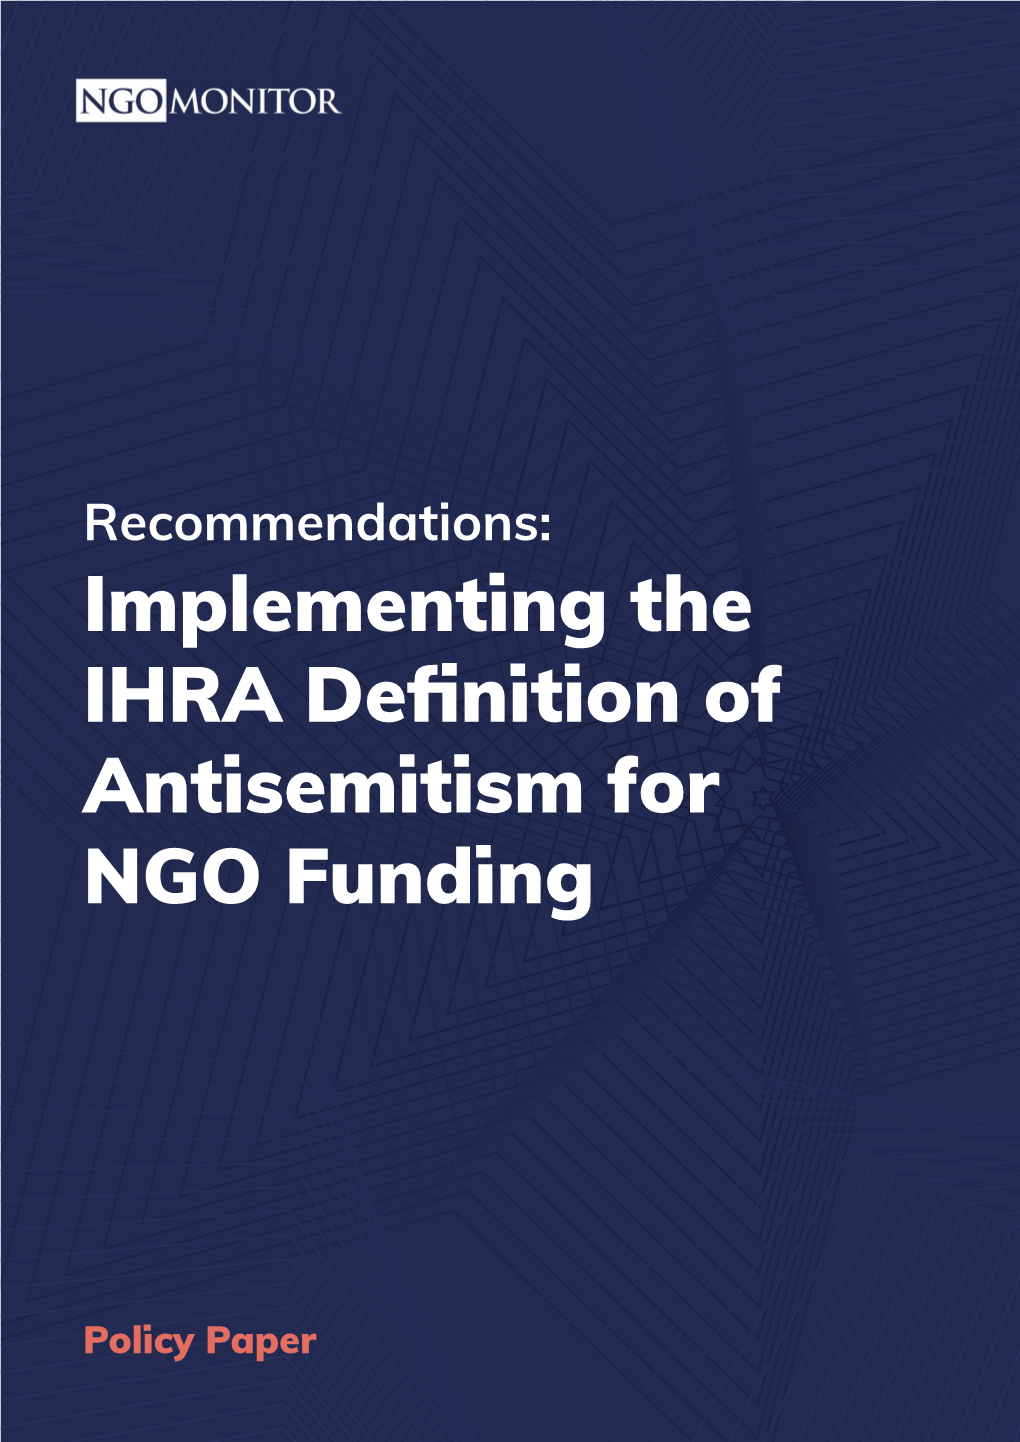 Implementing the IHRA Definition of Antisemitism for NGO Funding